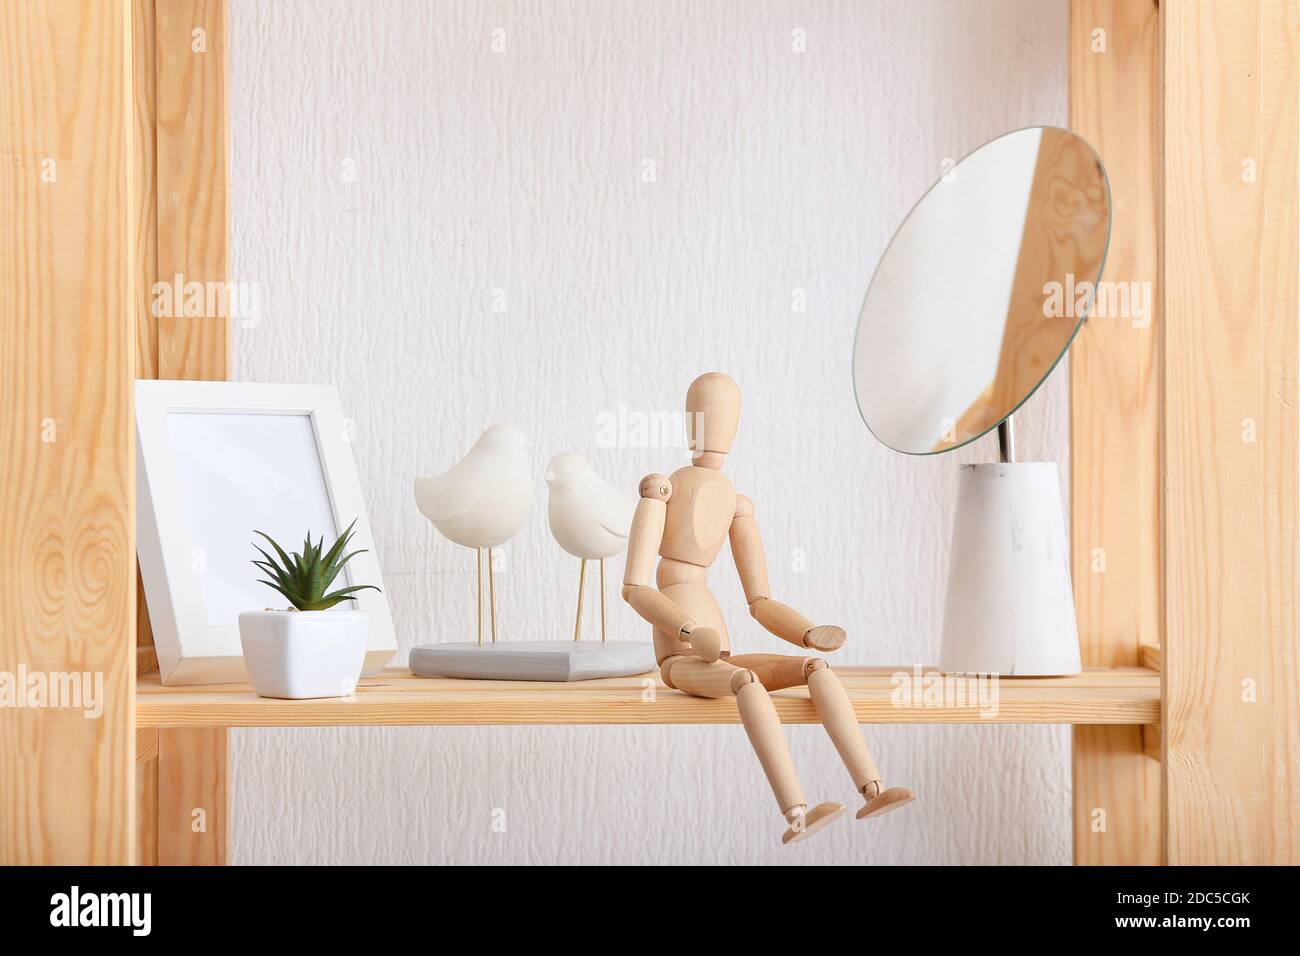 Still life. Wooden drawing mannequin dummy to learn how to draw human body  in position of movement, displayed on shelf in creative department of schoo  Stock Photo - Alamy